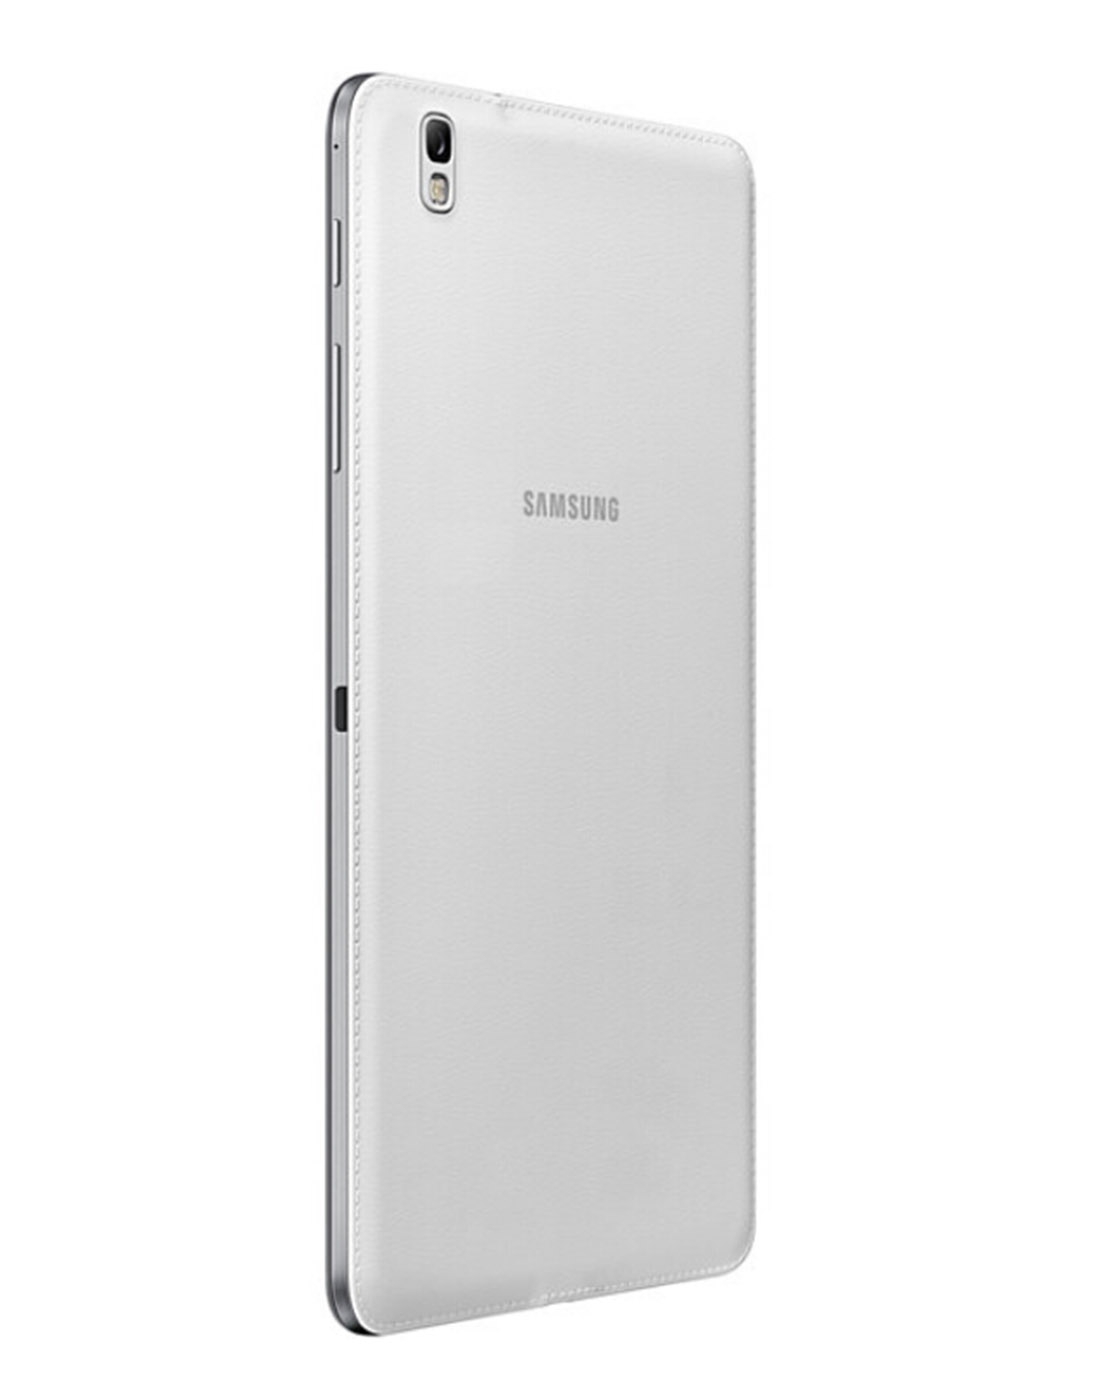 Samsung I9001 Galaxy S Plus specs, review, release date - PhonesData